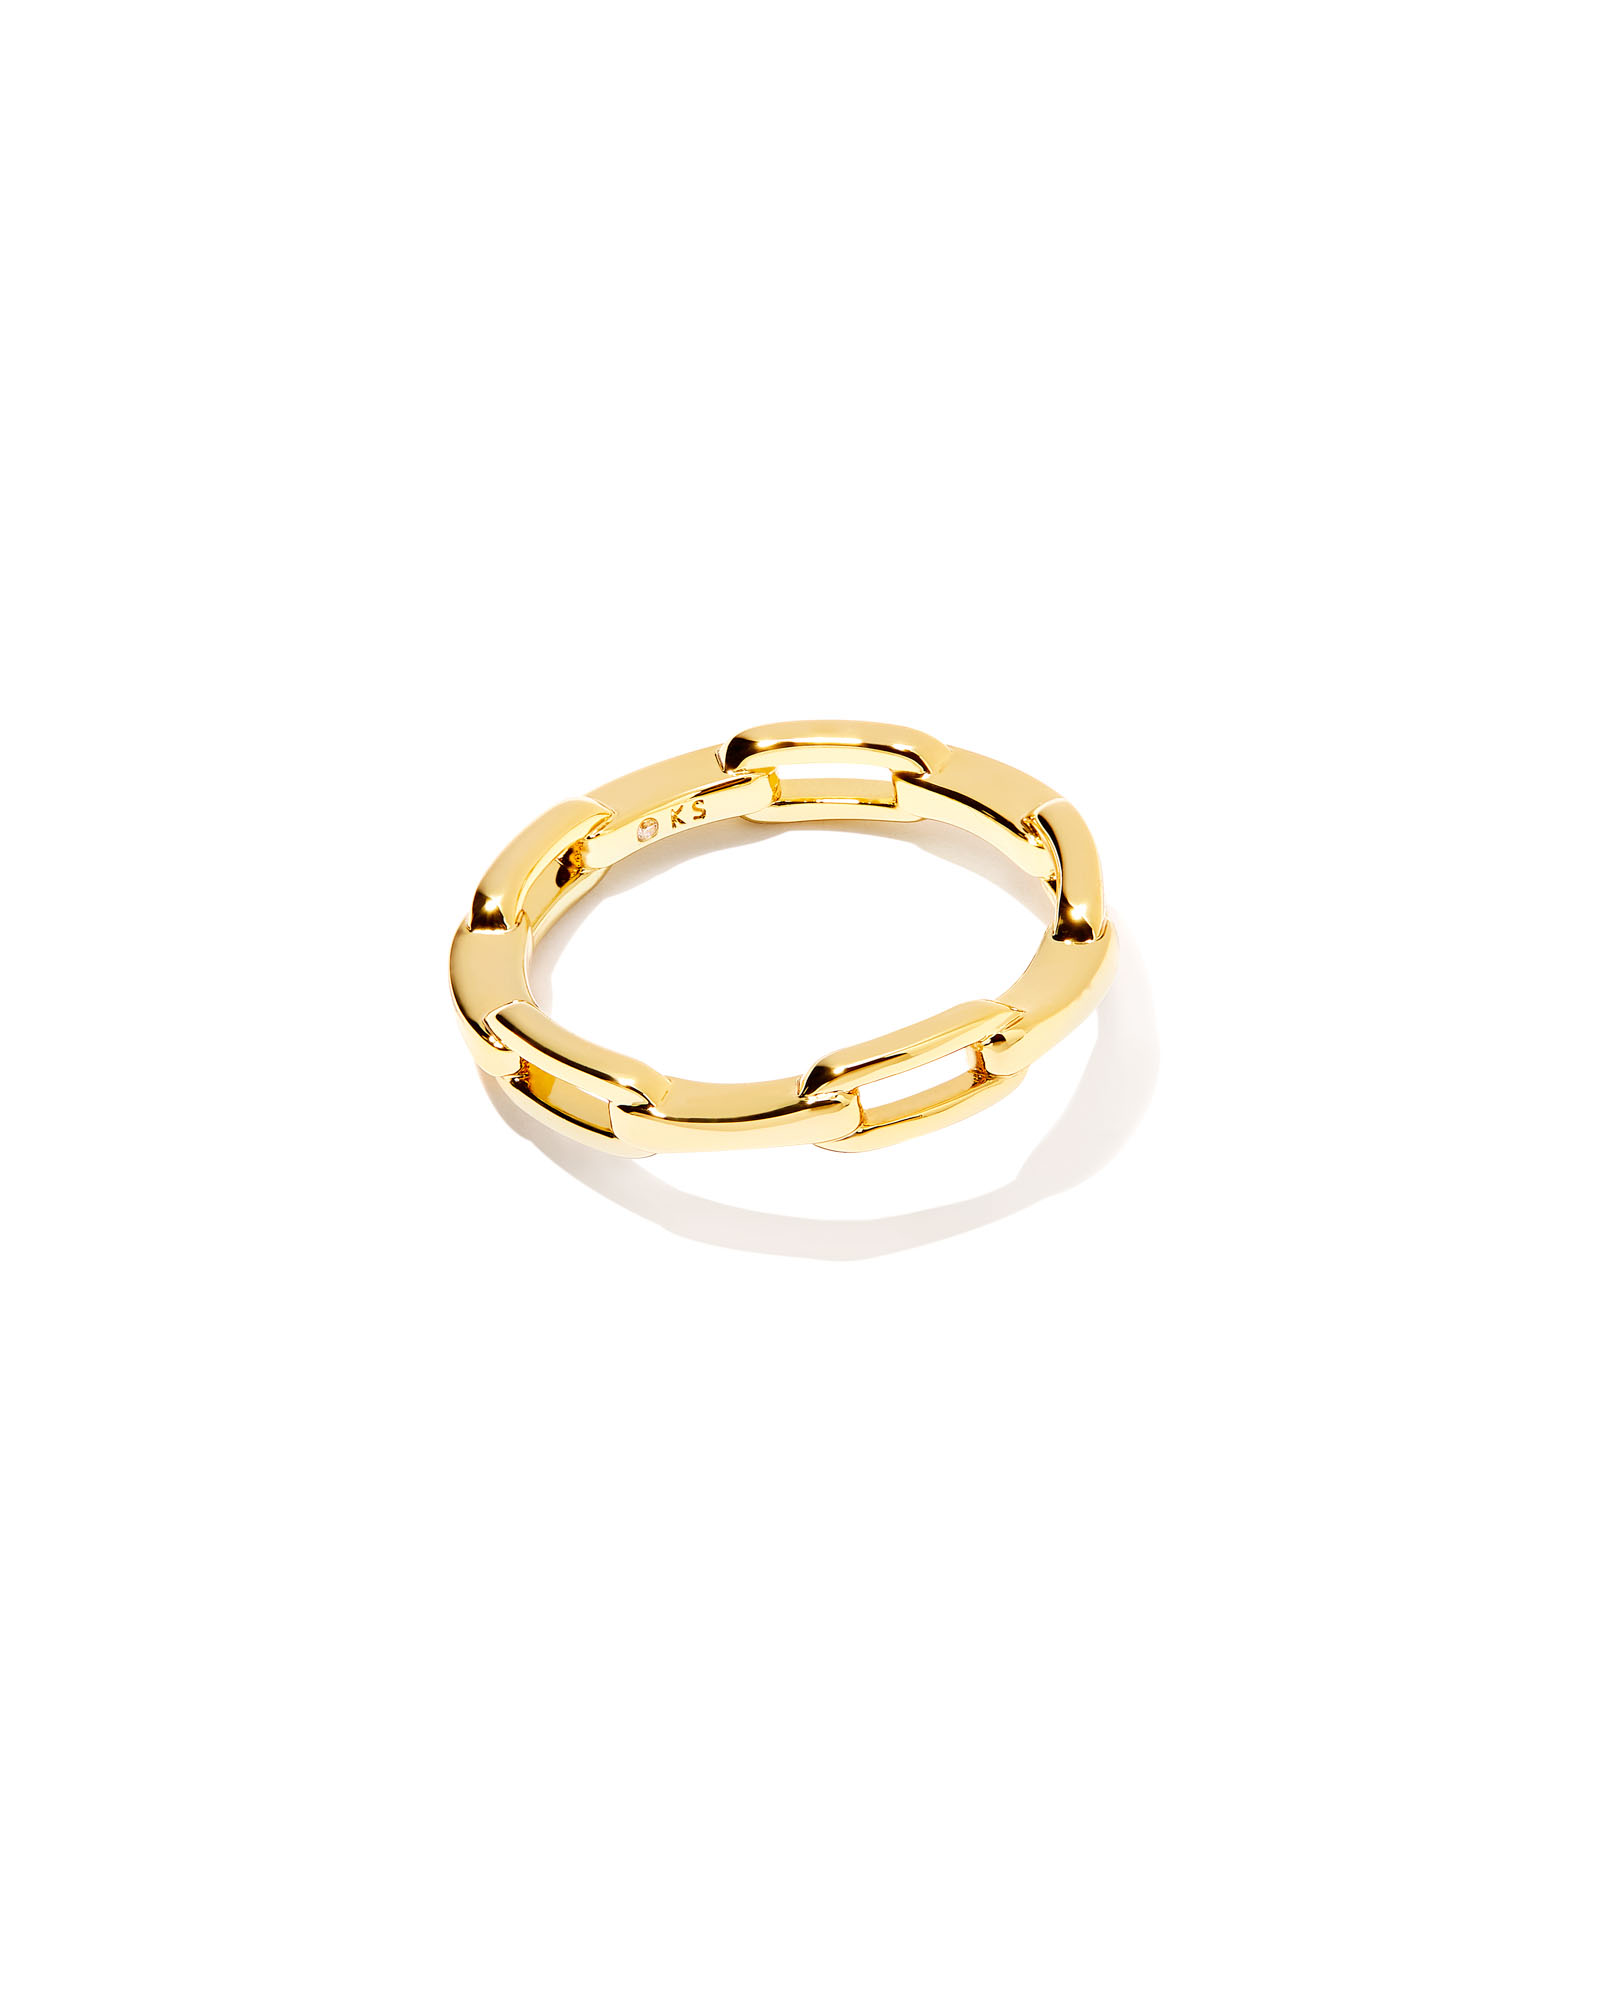 Andi Band Ring in Gold | Kendra Scott